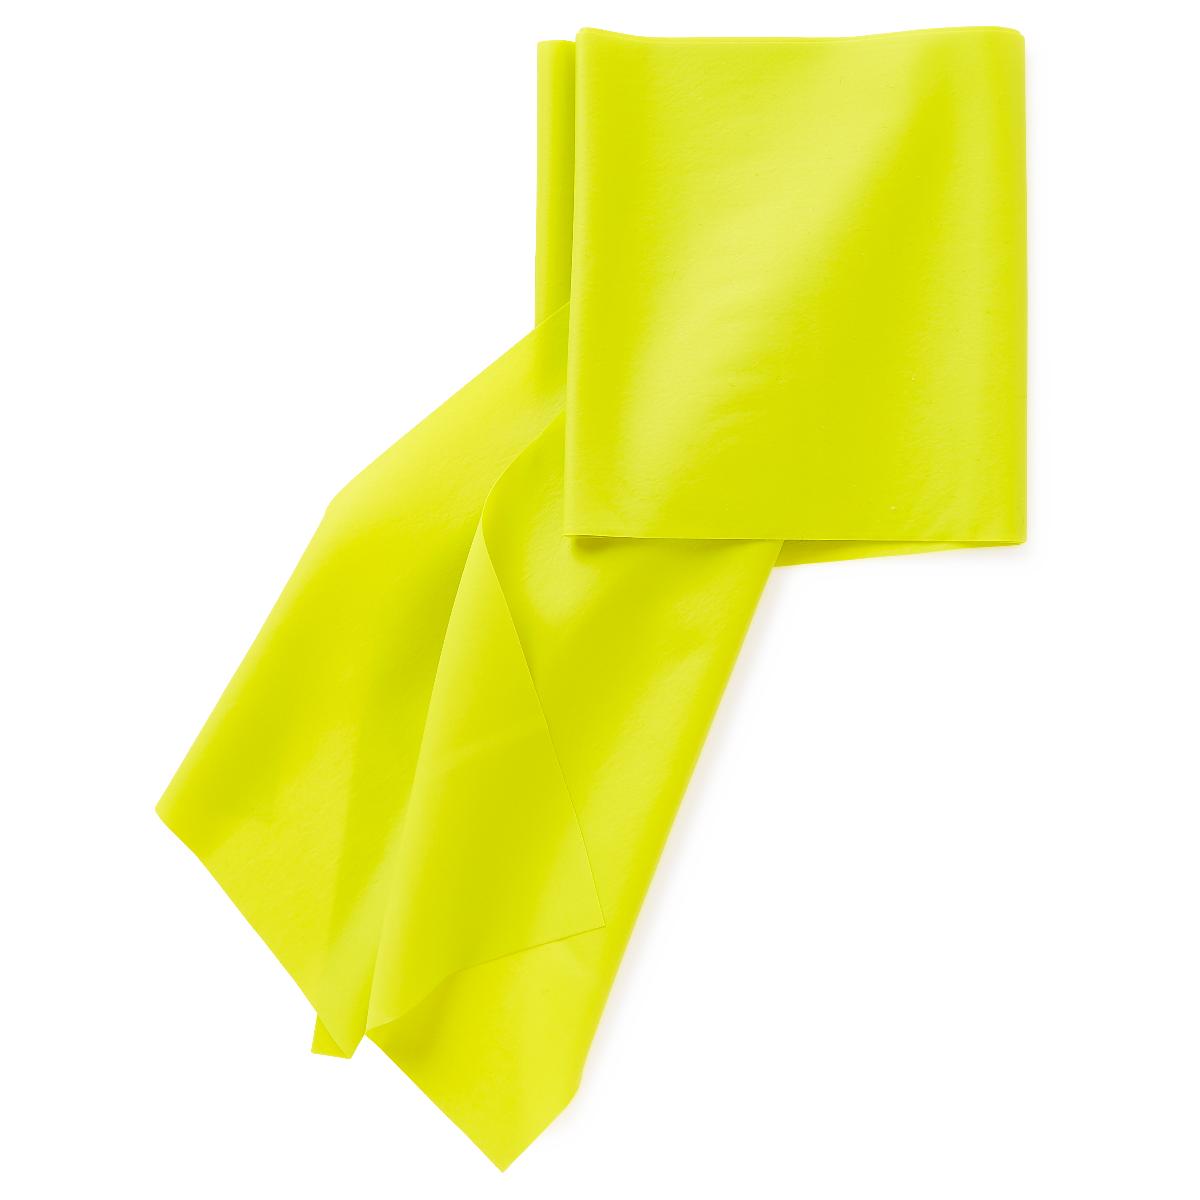 1 Each-Each / Lime Green / 25.000 YD Physical Therapy - MEDLINE - Wasatch Medical Supply